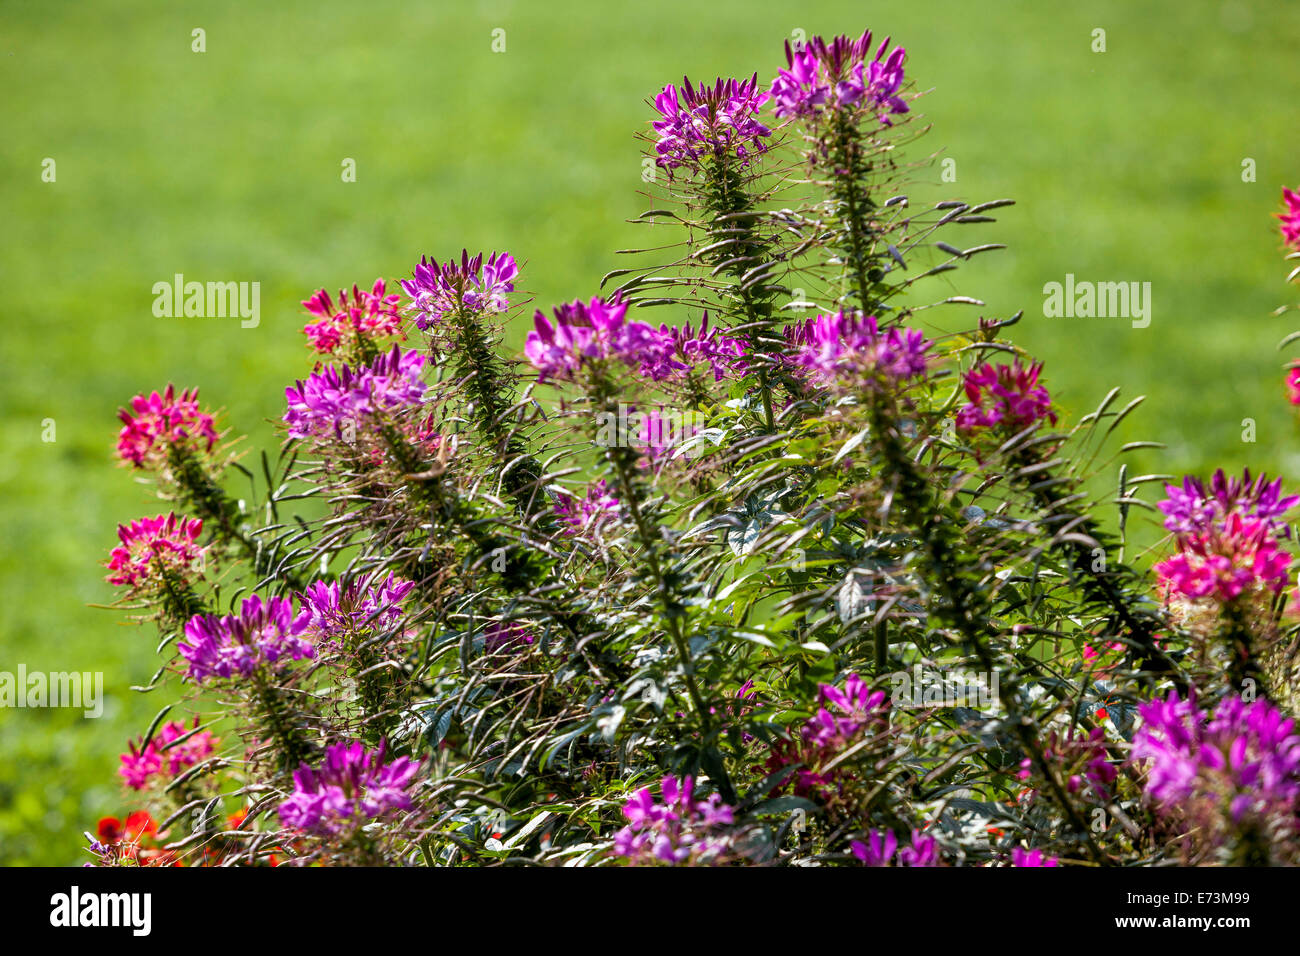 Cleome Spinosa Spider Flower Growing In A Garden Stock Photo Alamy